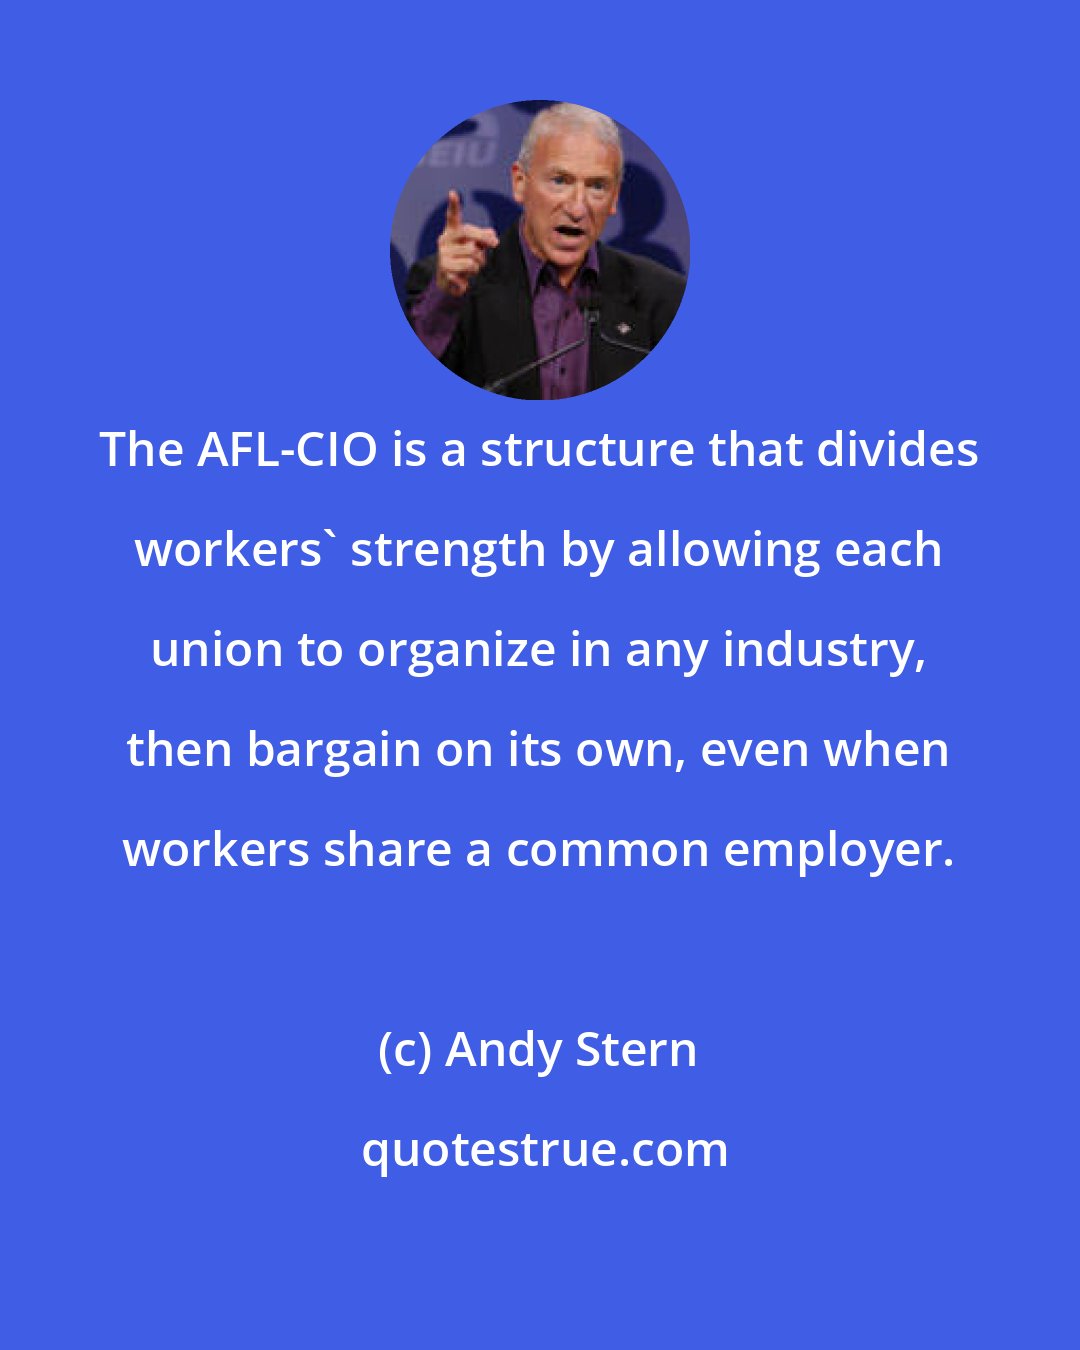 Andy Stern: The AFL-CIO is a structure that divides workers' strength by allowing each union to organize in any industry, then bargain on its own, even when workers share a common employer.